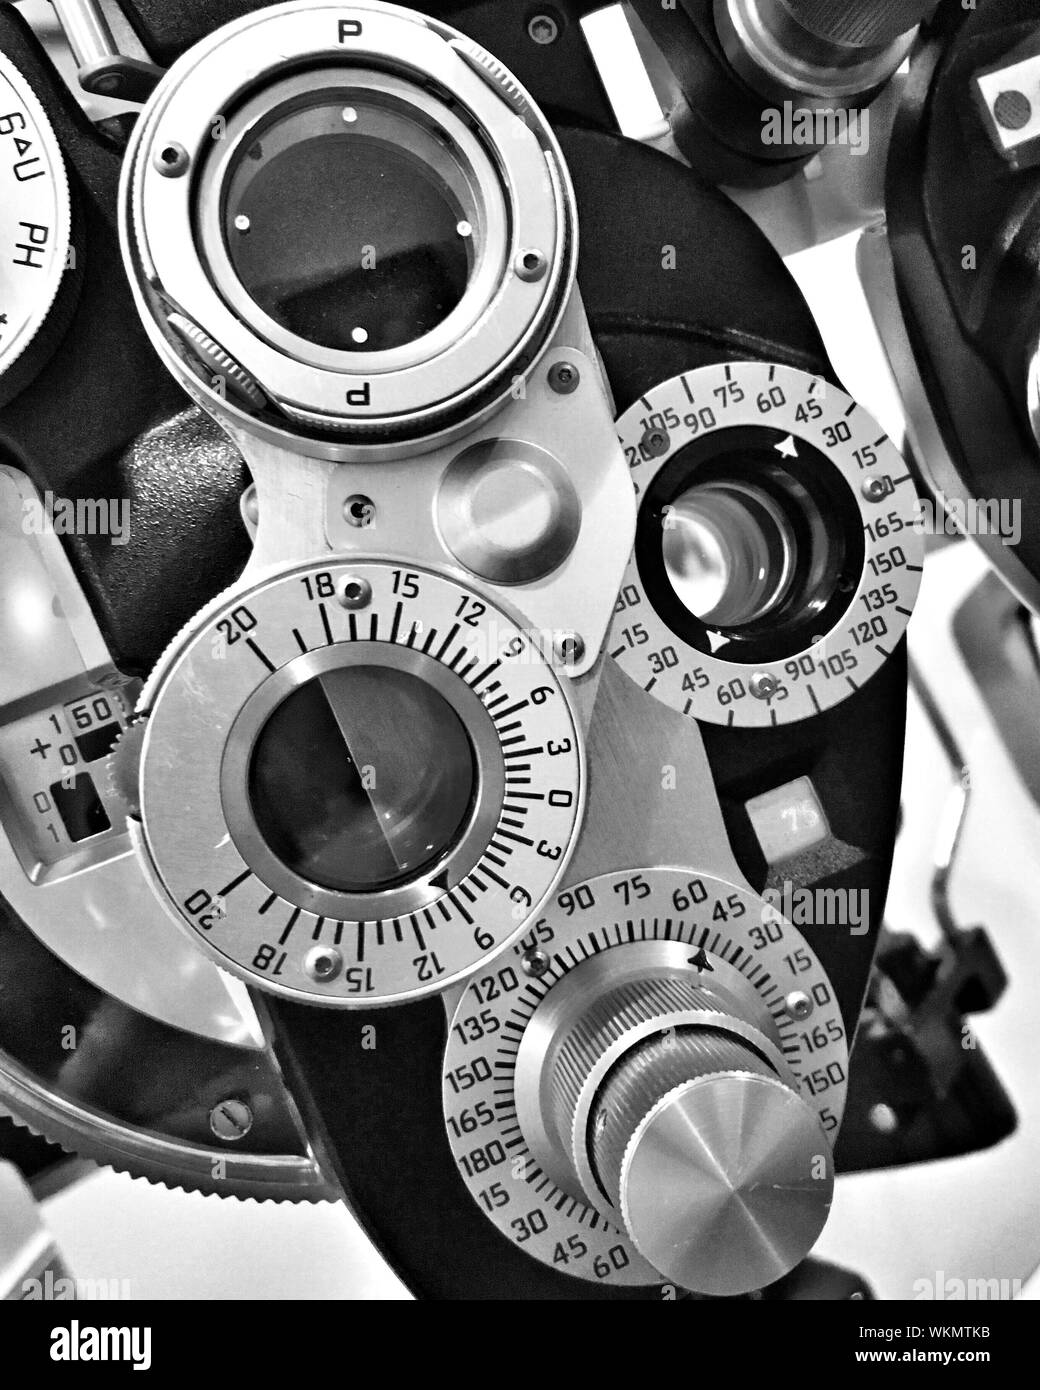 free-download-eye-test-equipment-black-and-white-stock-photos-images